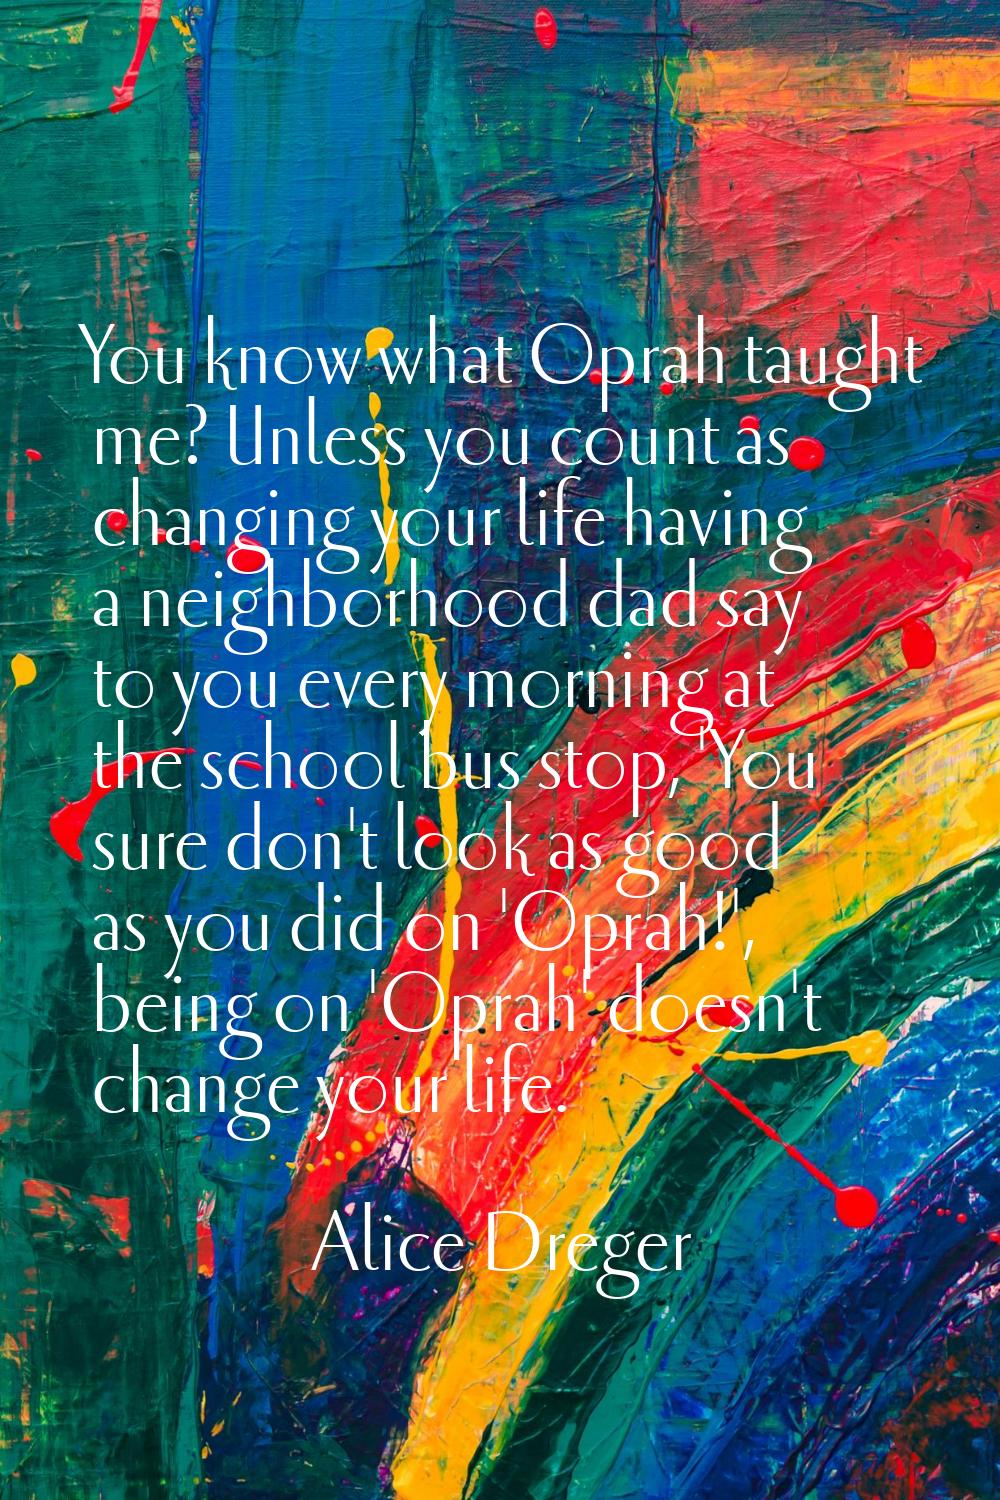 You know what Oprah taught me? Unless you count as changing your life having a neighborhood dad say